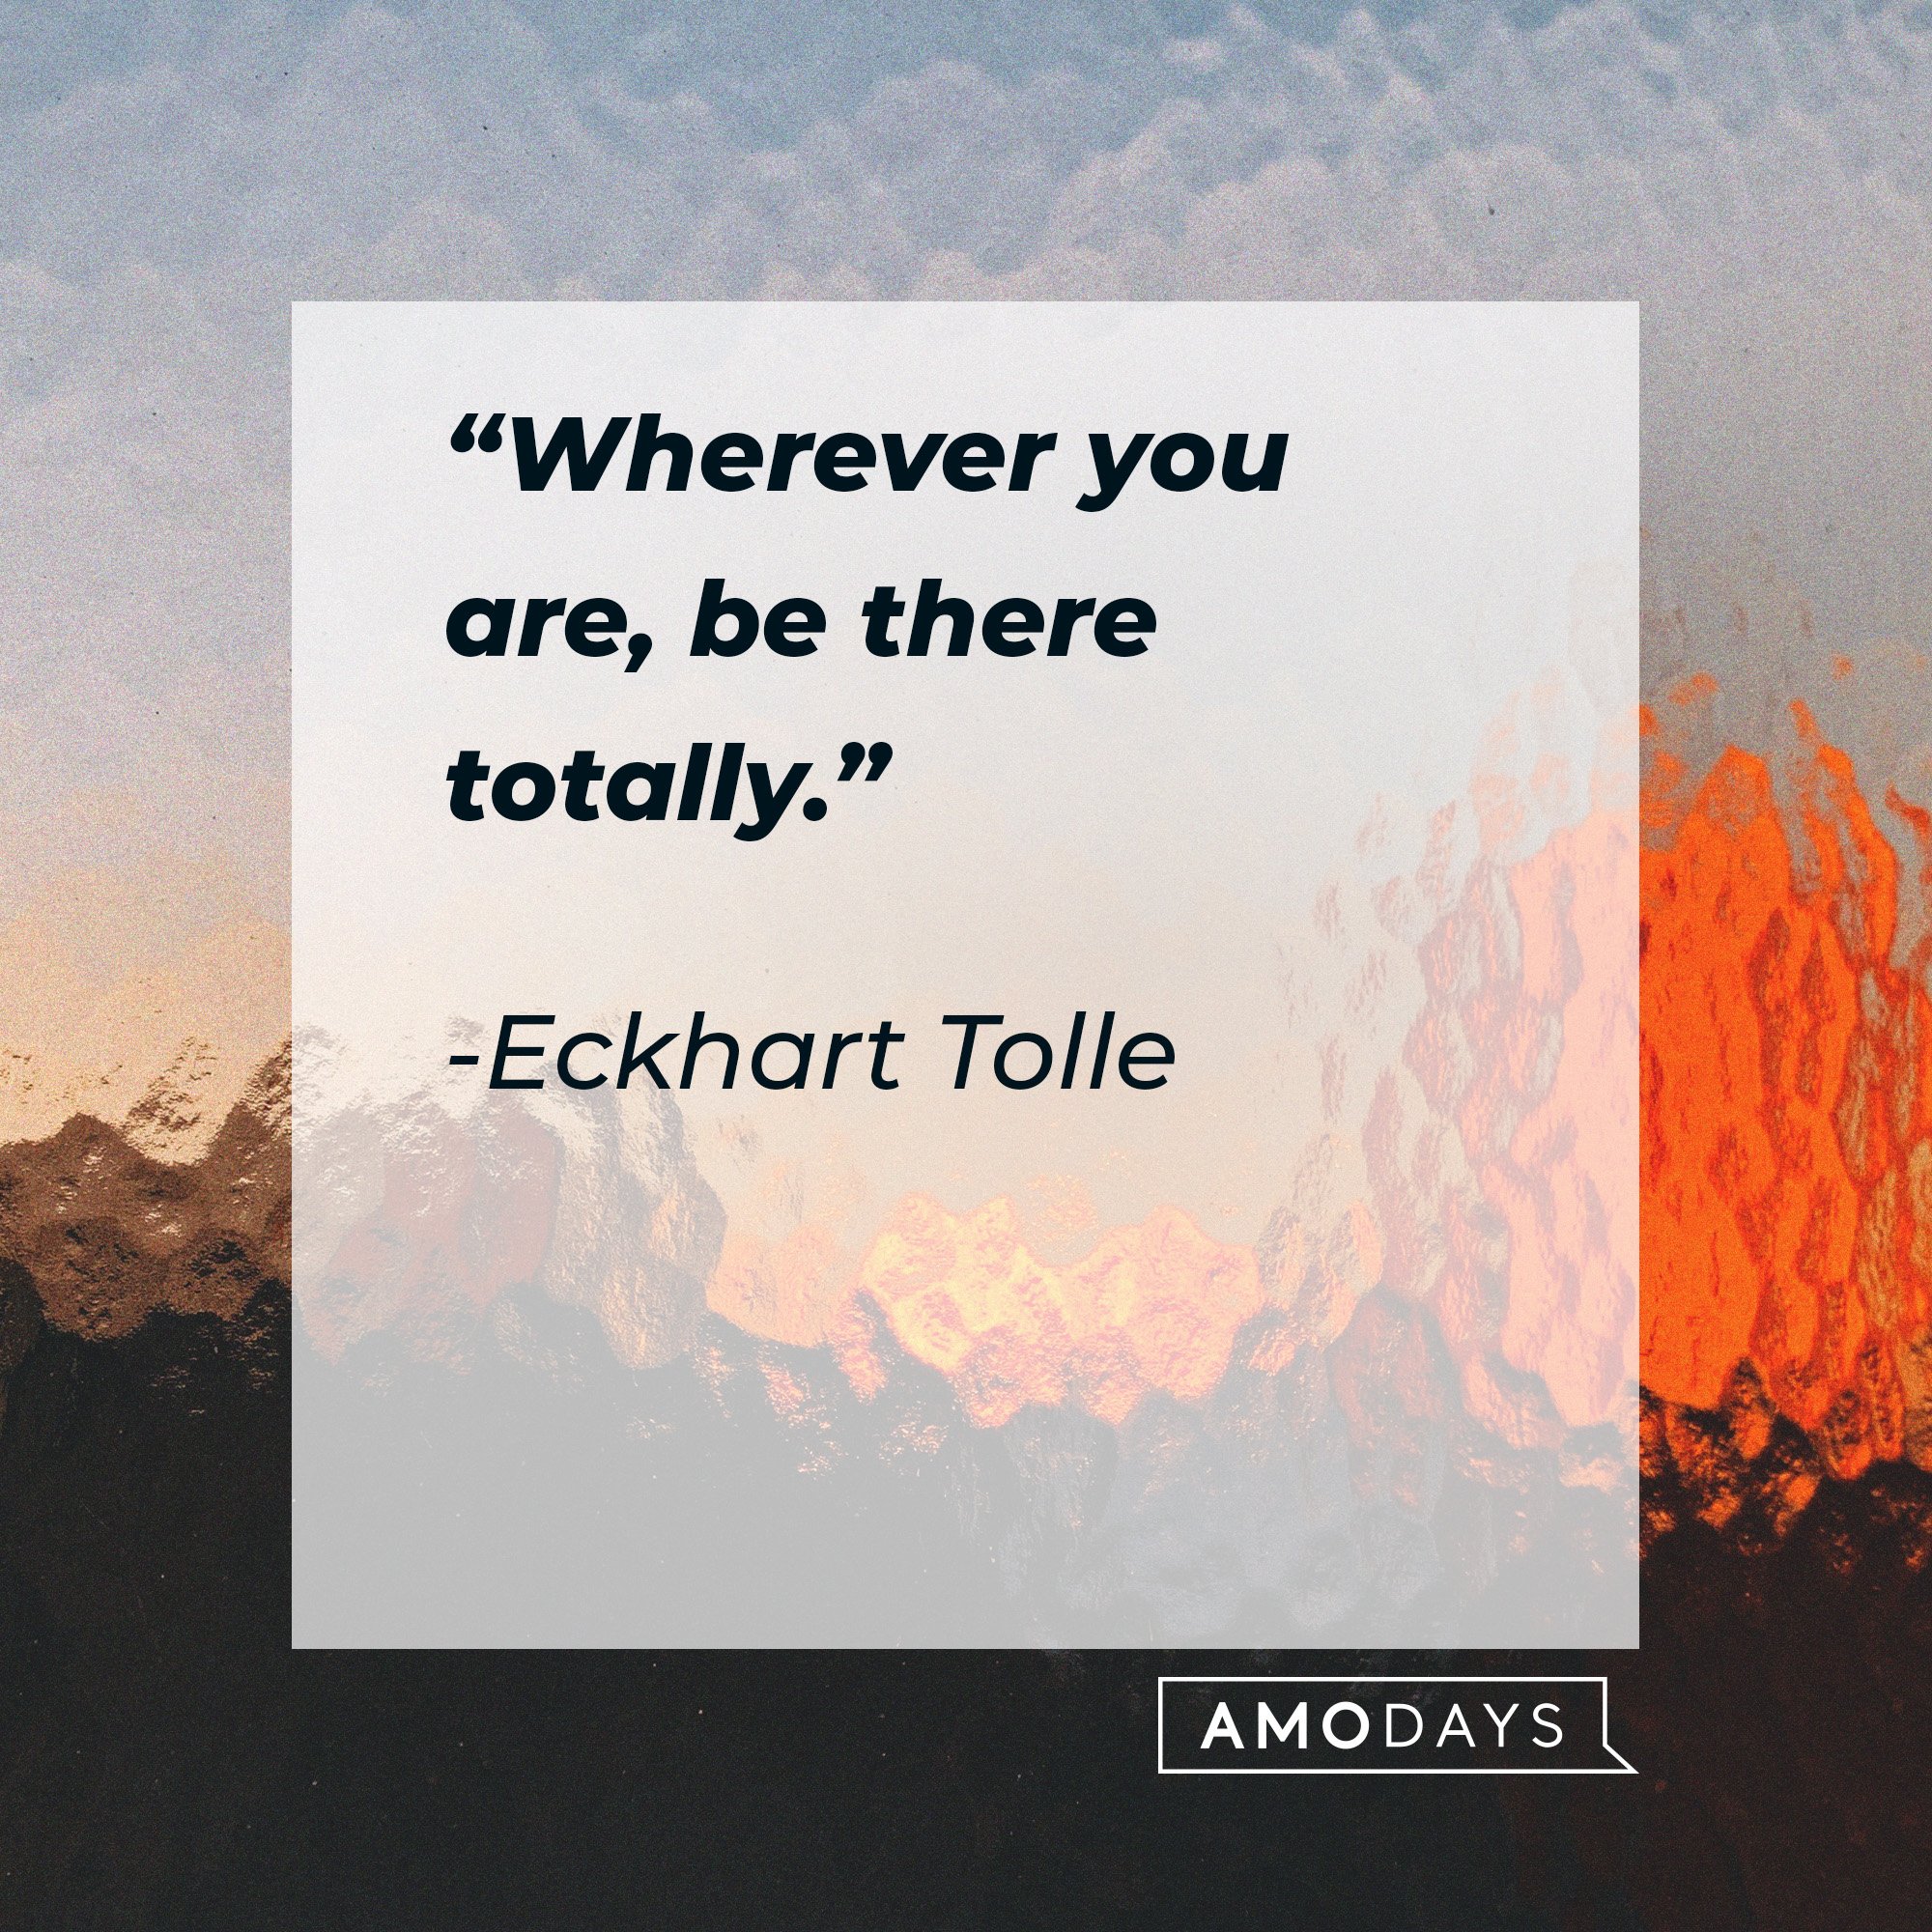  Eckhart Tolle's quote: “Wherever you are, be there totally.” | Image: AmoDays